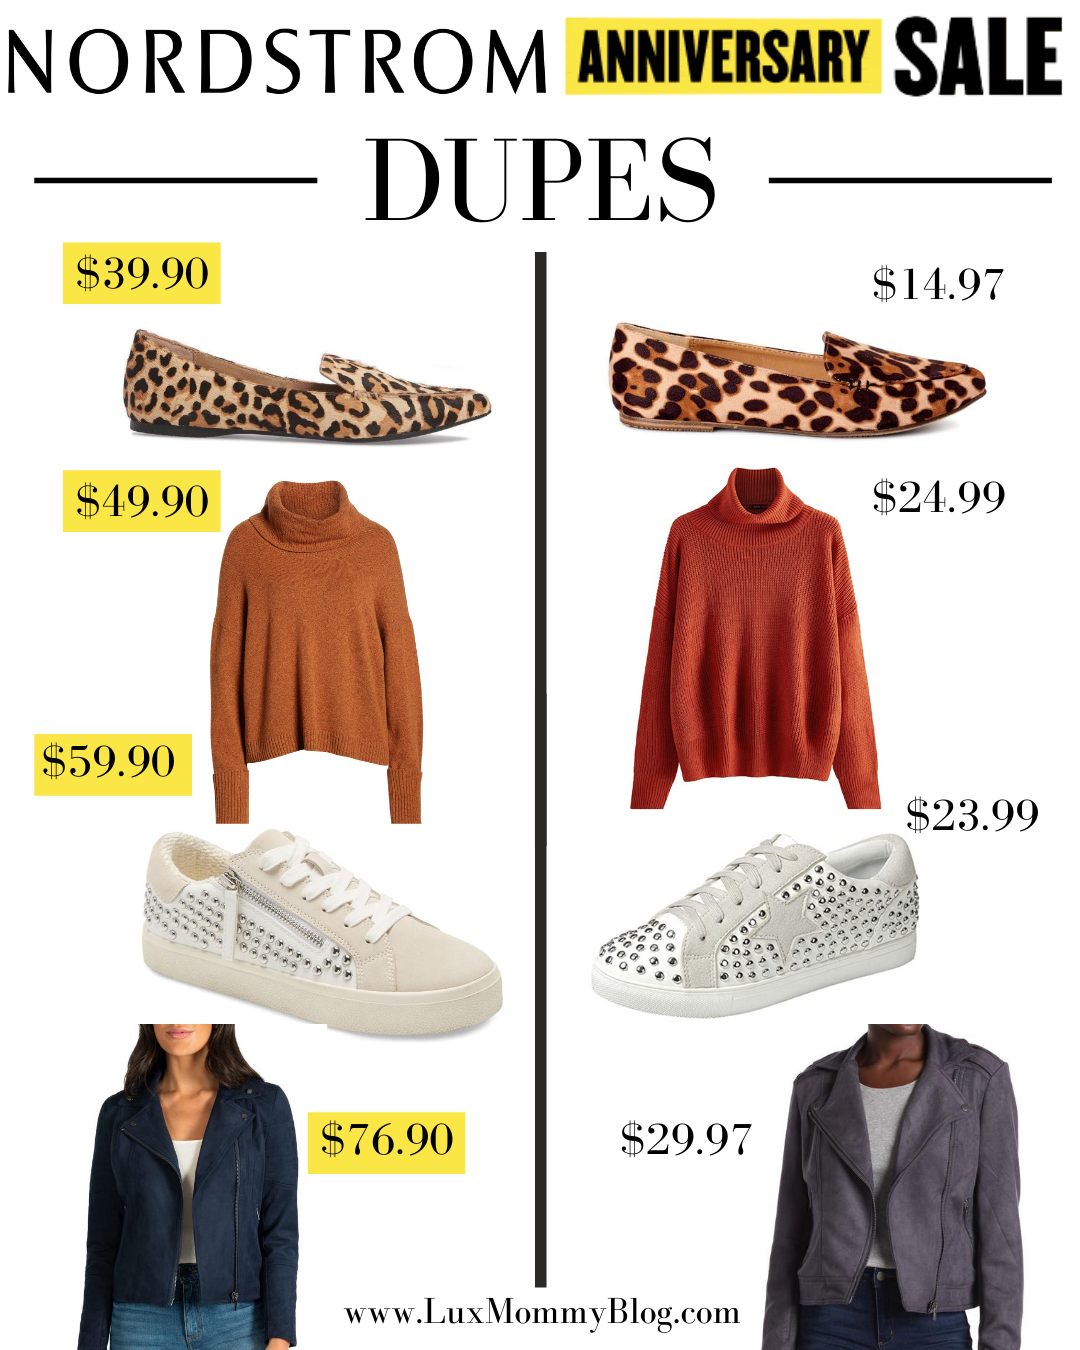 NORDSTROM SALE 2022, LOOKS FOR LESS, DUPES TO BUY INSTEAD